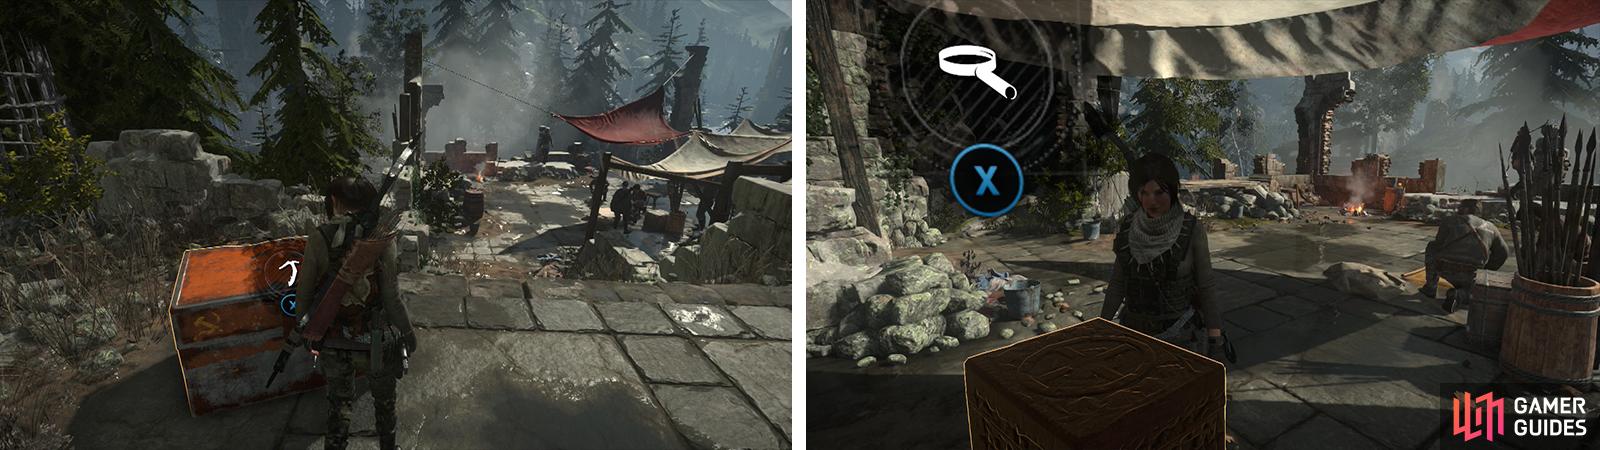 When you reach the Geothermal Valley grab the Strongbox (left). Beneath the white tent you’ll find Relic 01 (right).